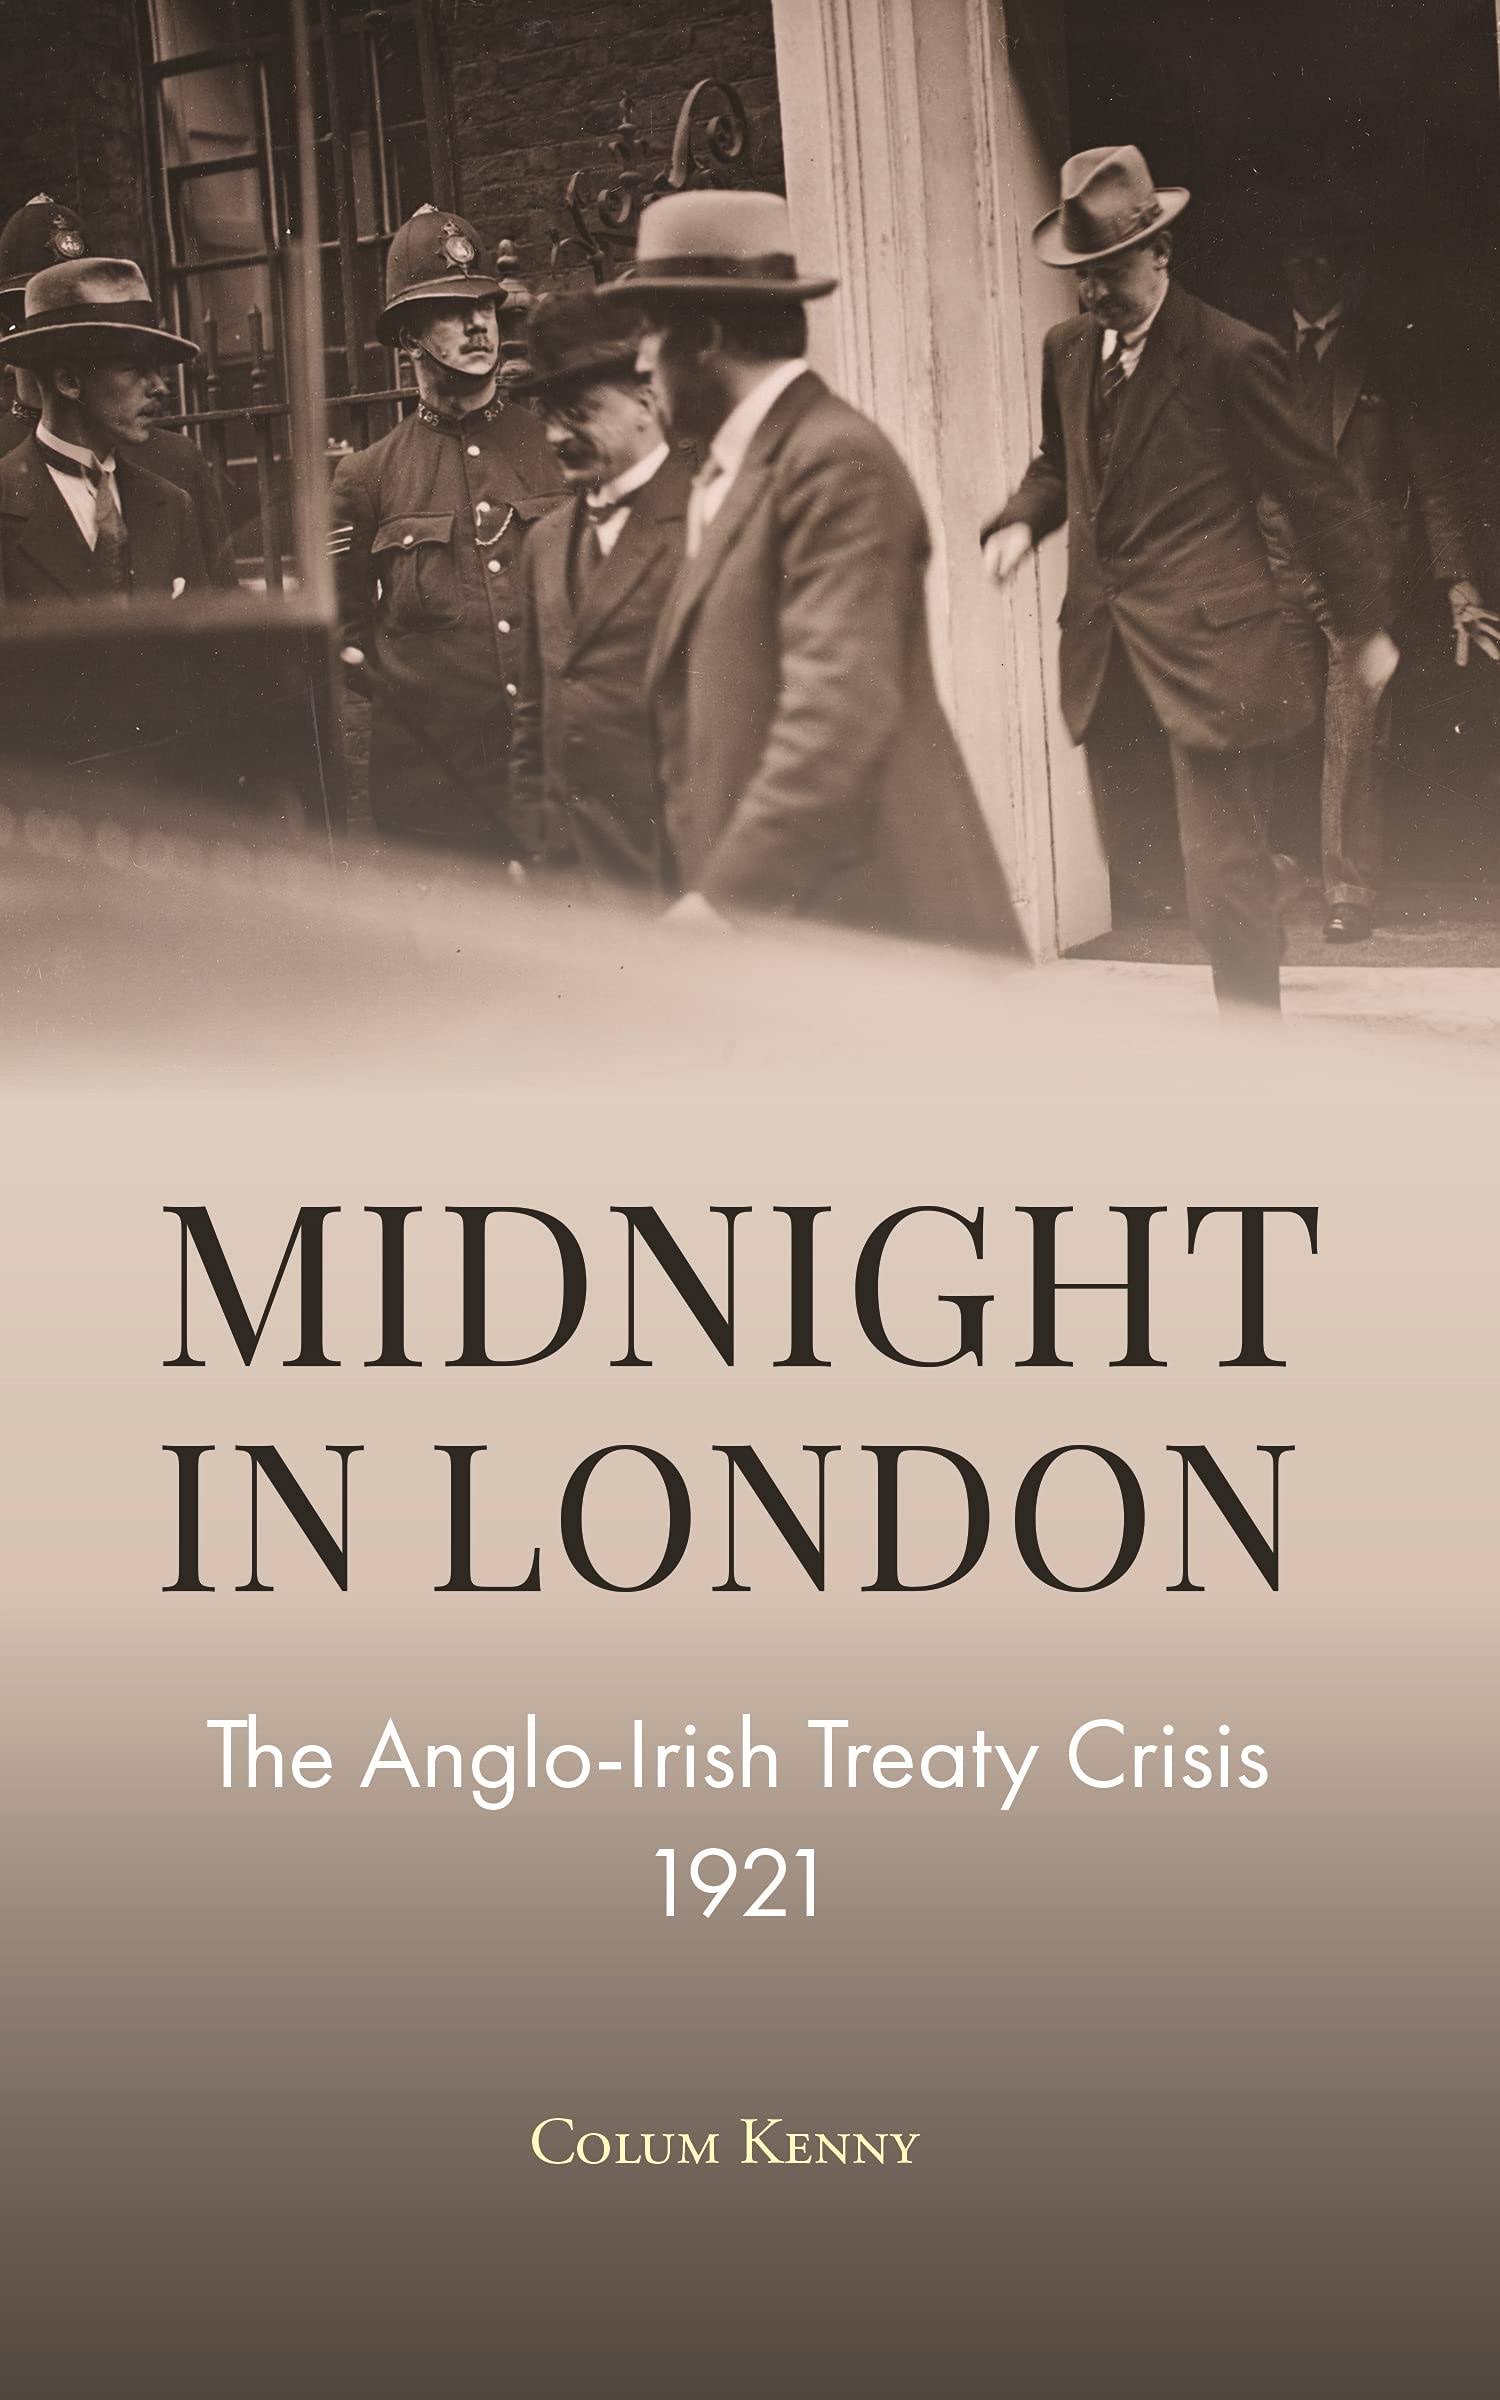 Midnight in London by Colum Kenny